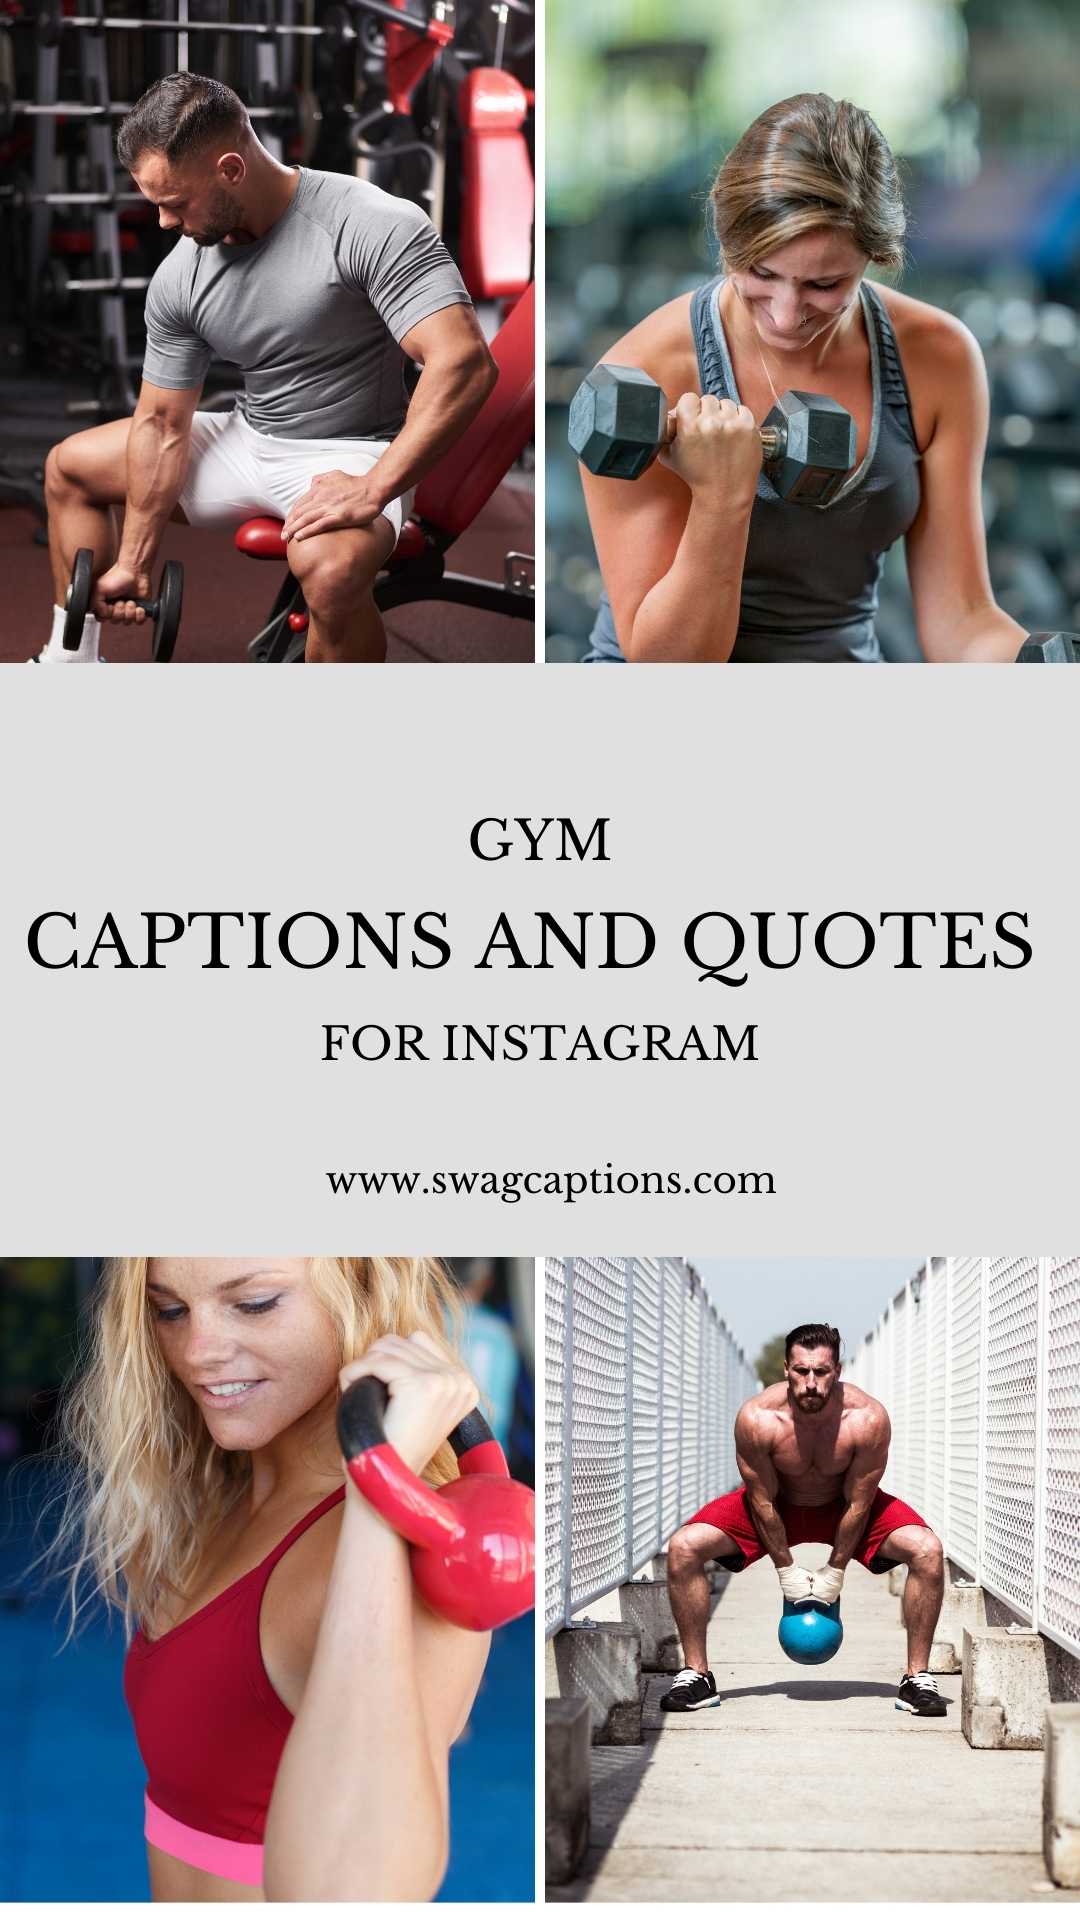 Gym Captions and Quotes for Instagram